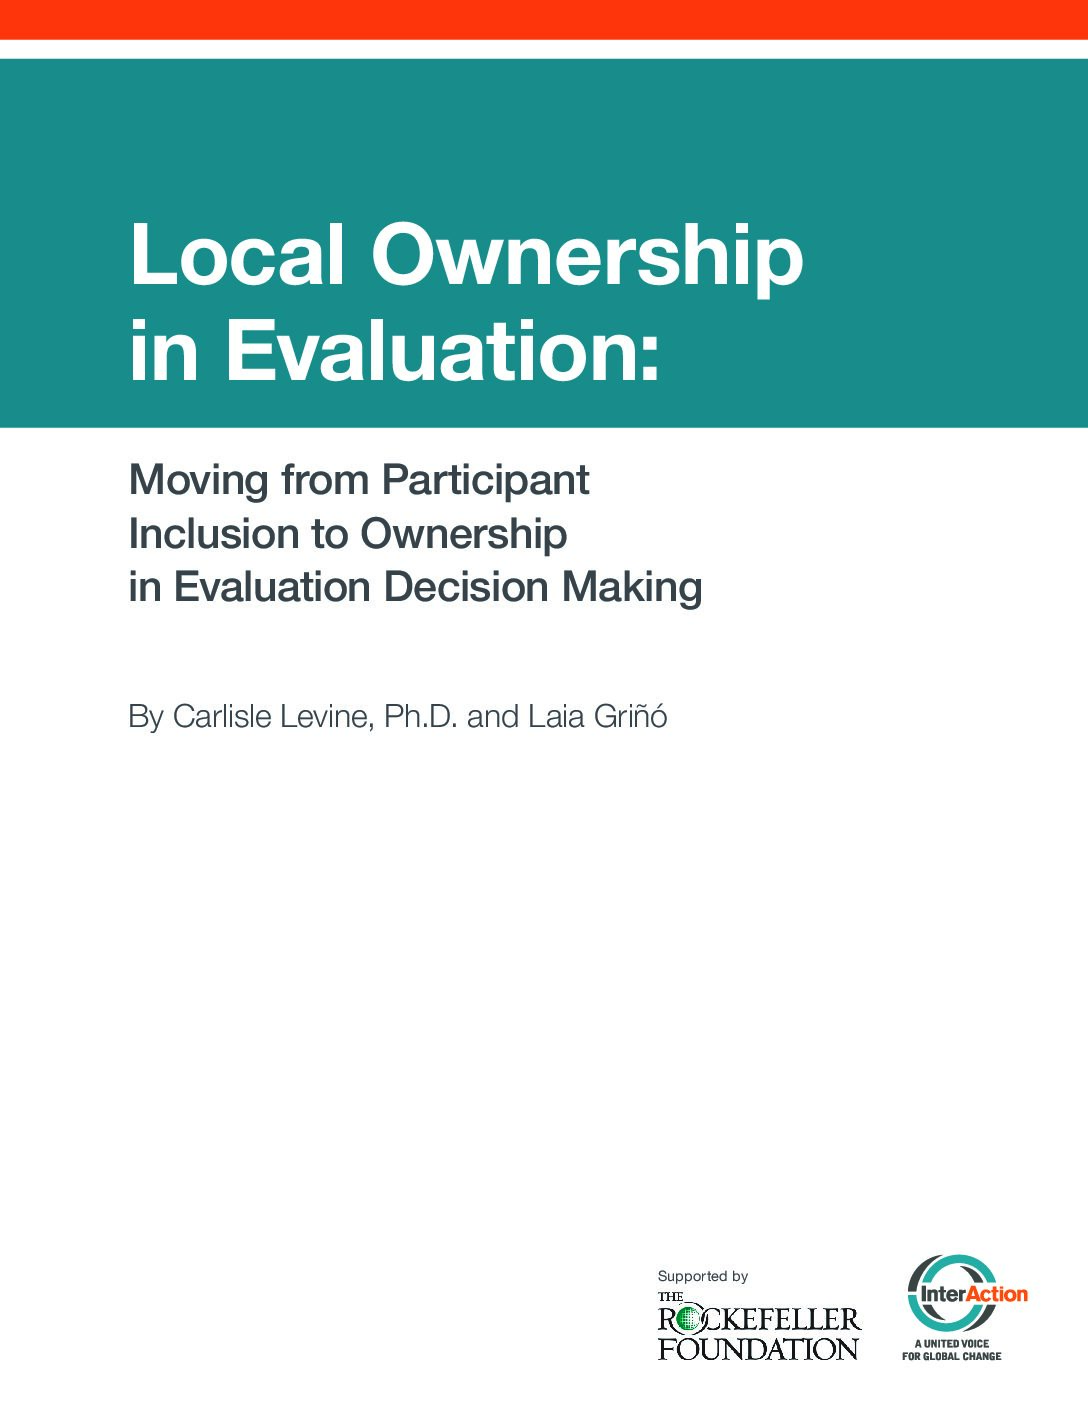 Photo of Local Ownership in Evaluation: Moving from Participant Inclusion to Ownership in Evaluation Decision Making